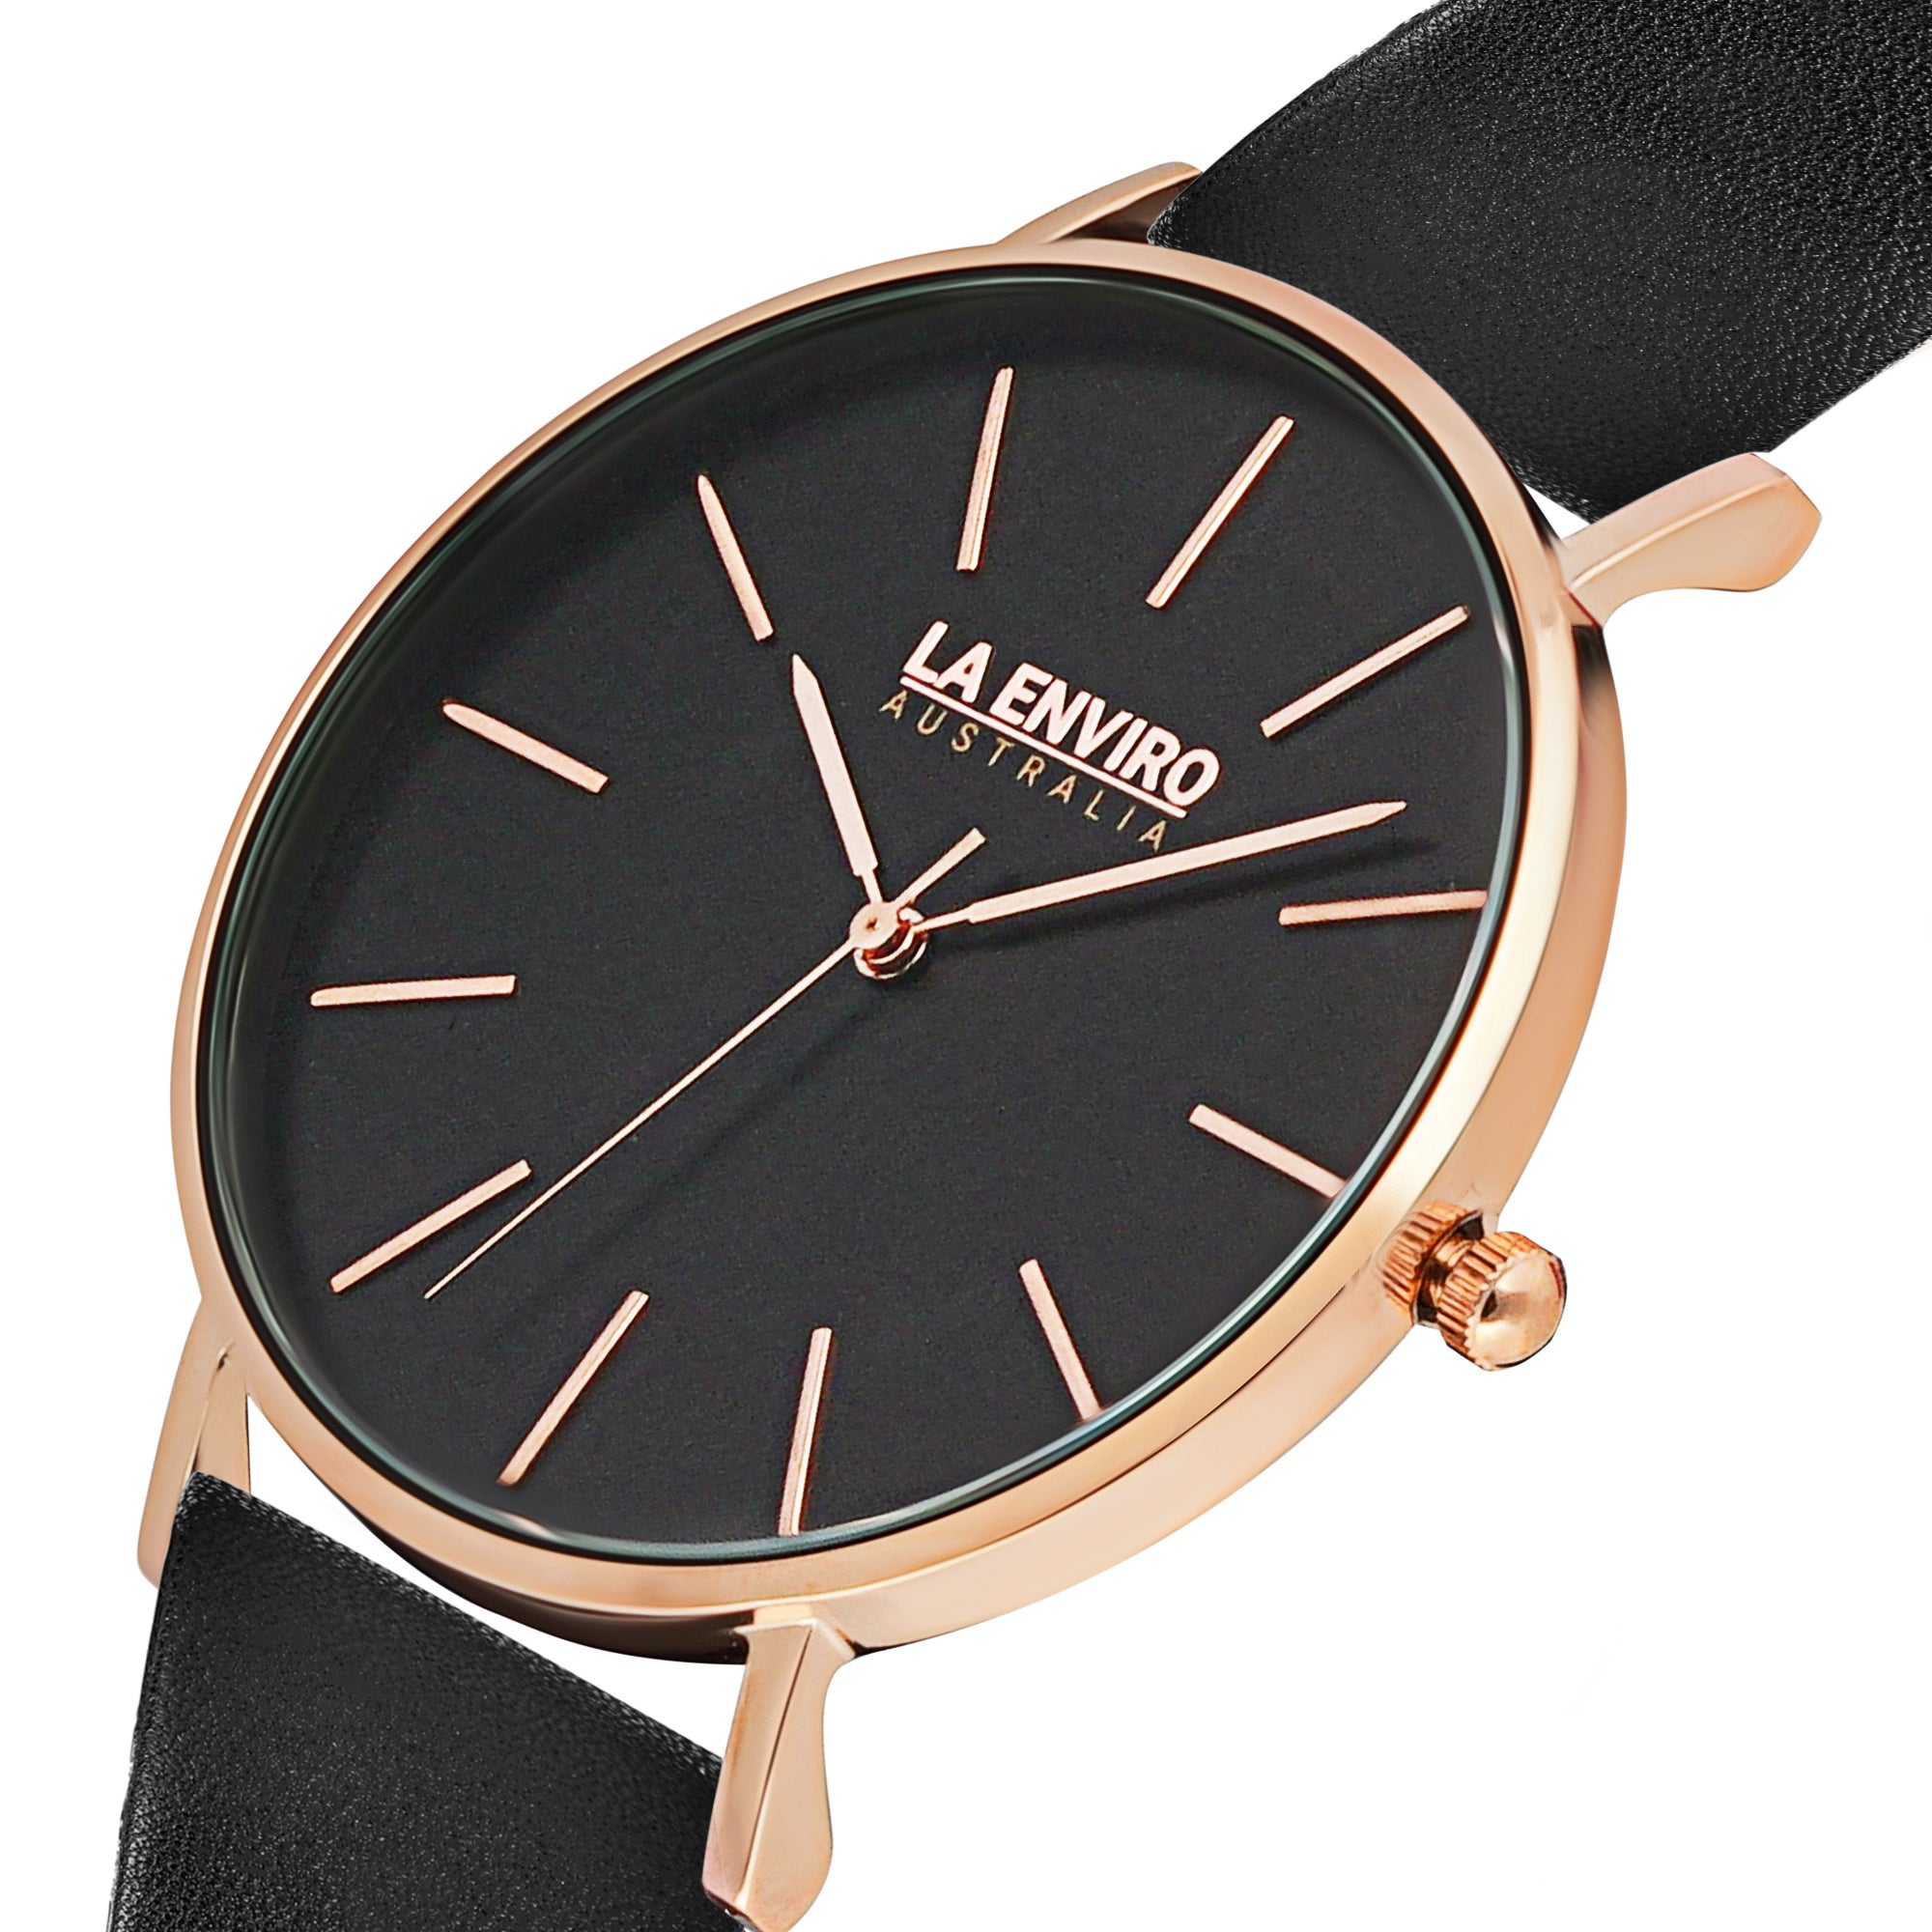 ROSE GOLD WITH BLACK STRAP I CLASSIC 40 MM